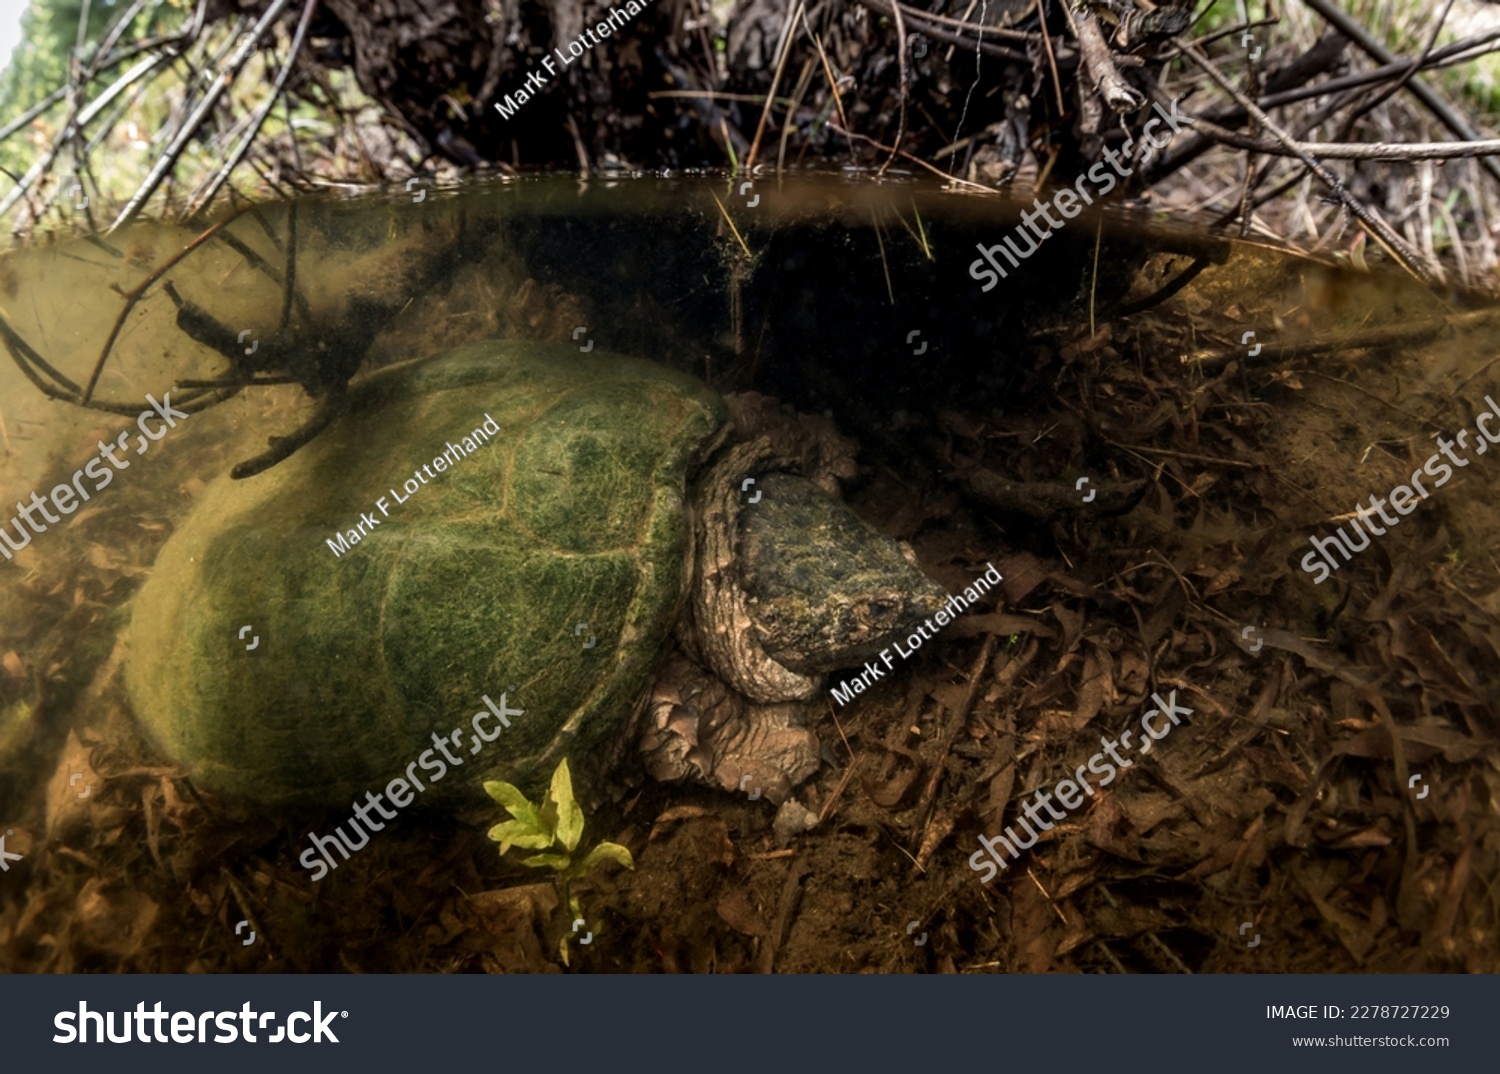 Underwater photo of a common snapping turtle in a Massachusetts vernal pool  #2278727229